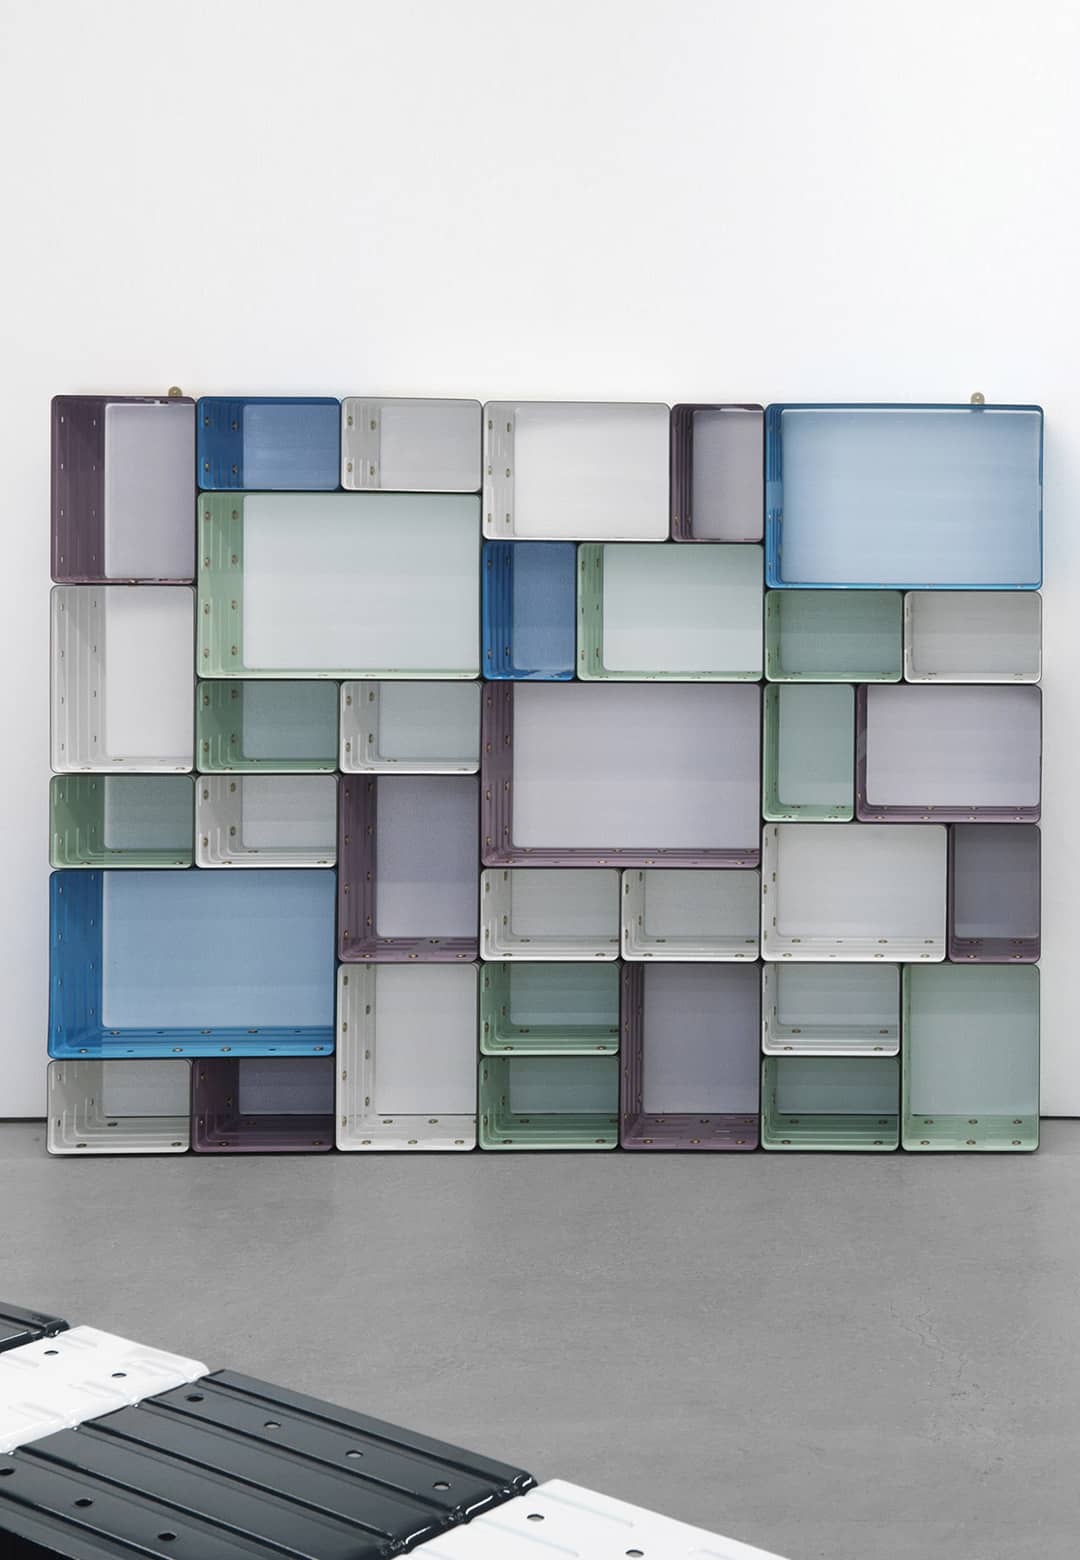 Marc Newson unveils a new series of shelves entitled Quobus at Galerie kreo